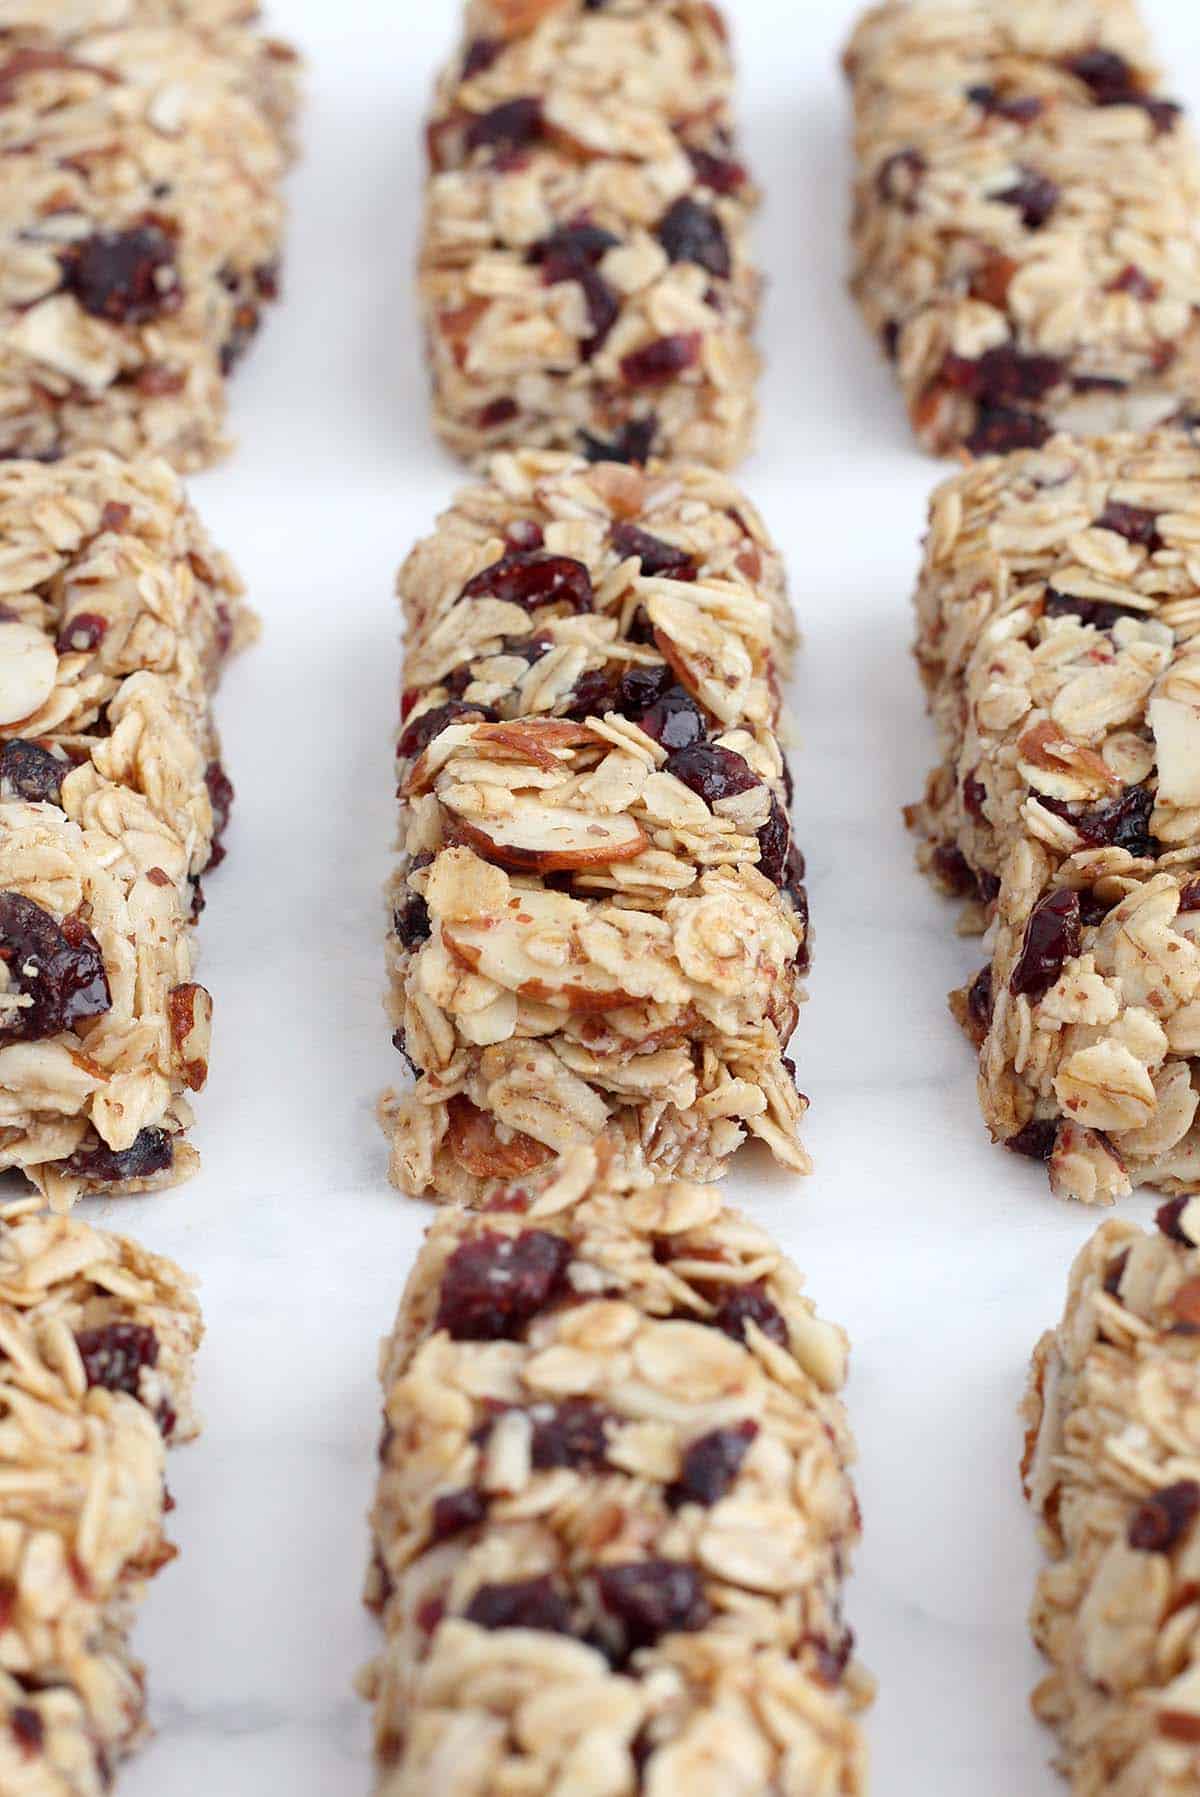 Close-up shot of oatmeal bar with almonds and dried cranberries